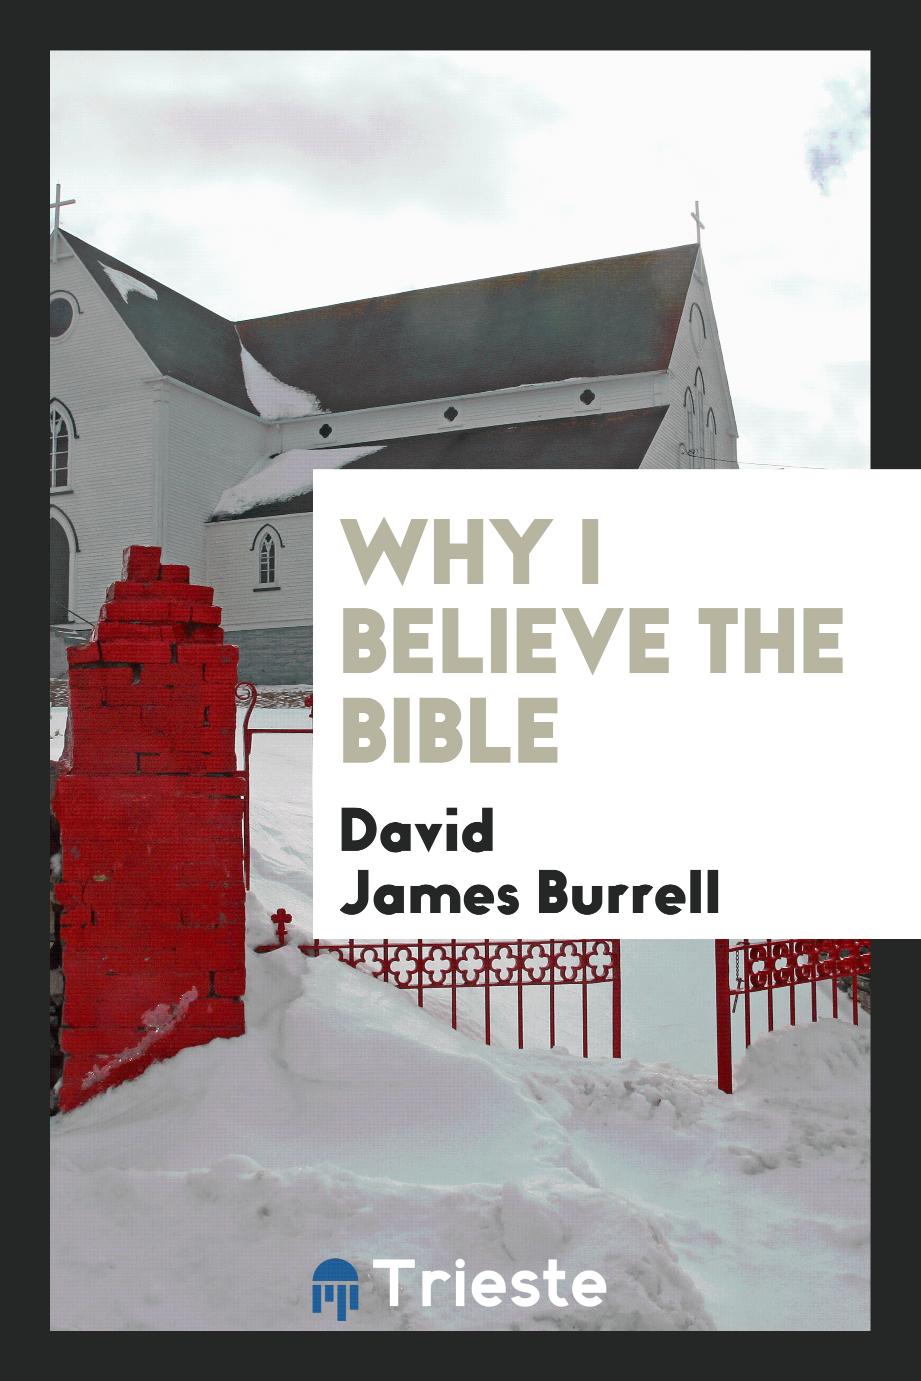 David James Burrell - Why I believe the Bible